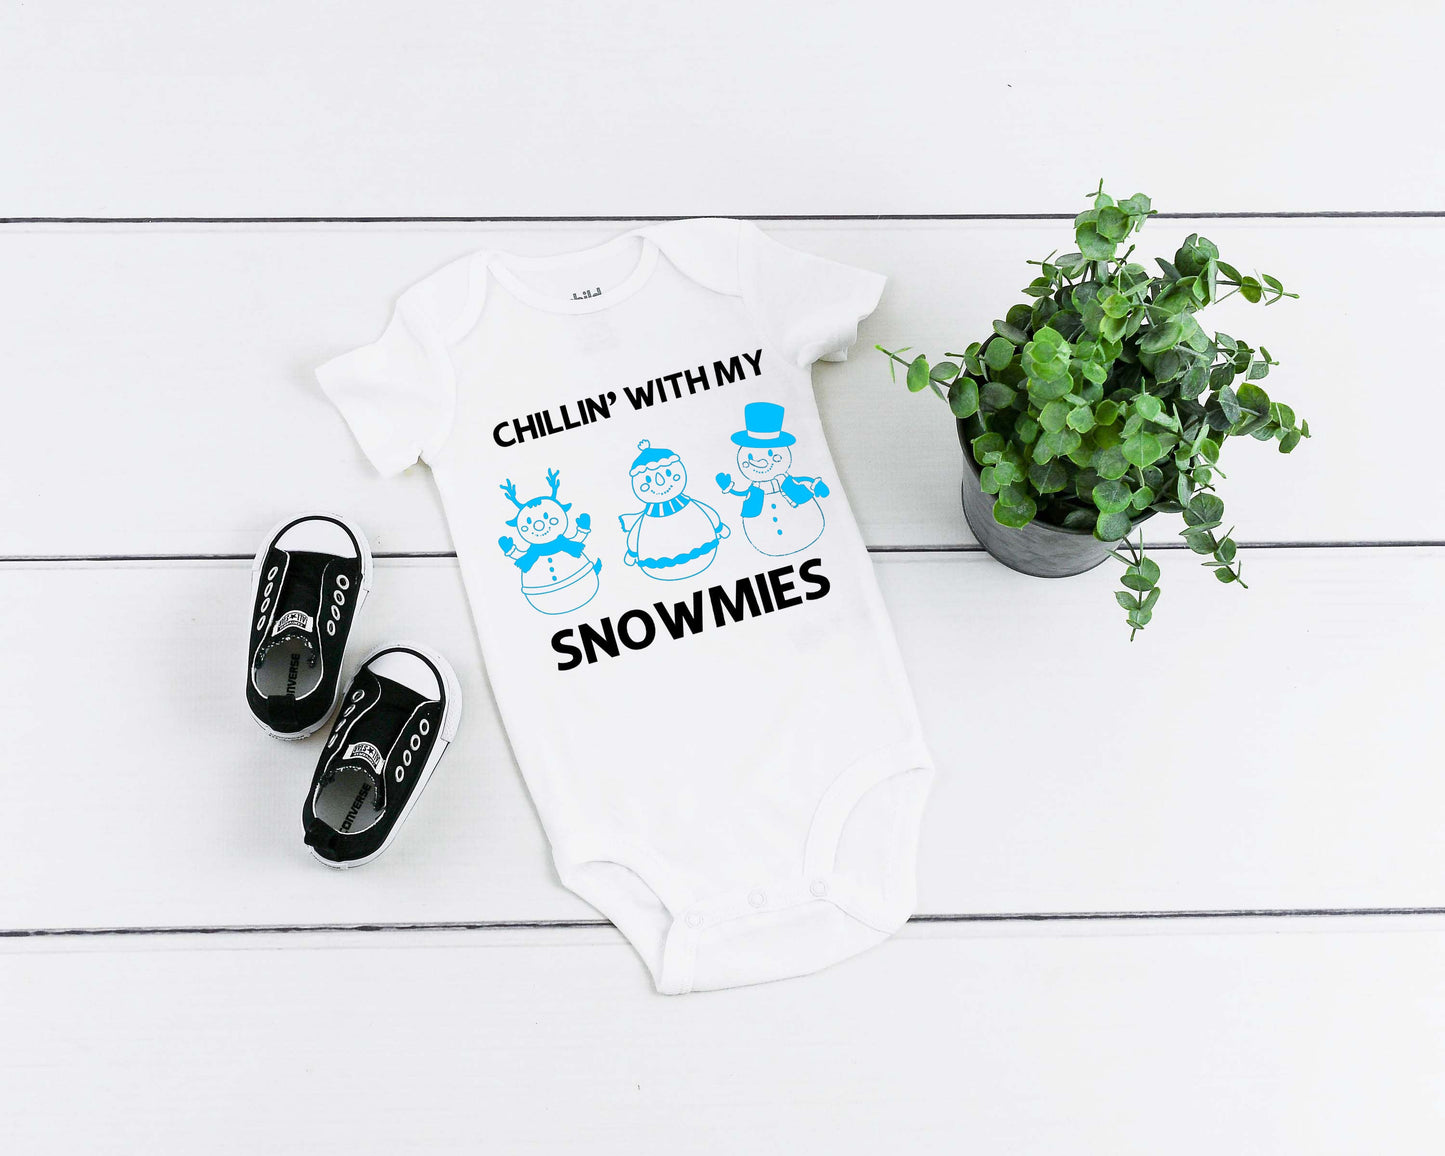 Chillin’ With My Snowmies Adult/ Child and Baby T-shirt/ romper